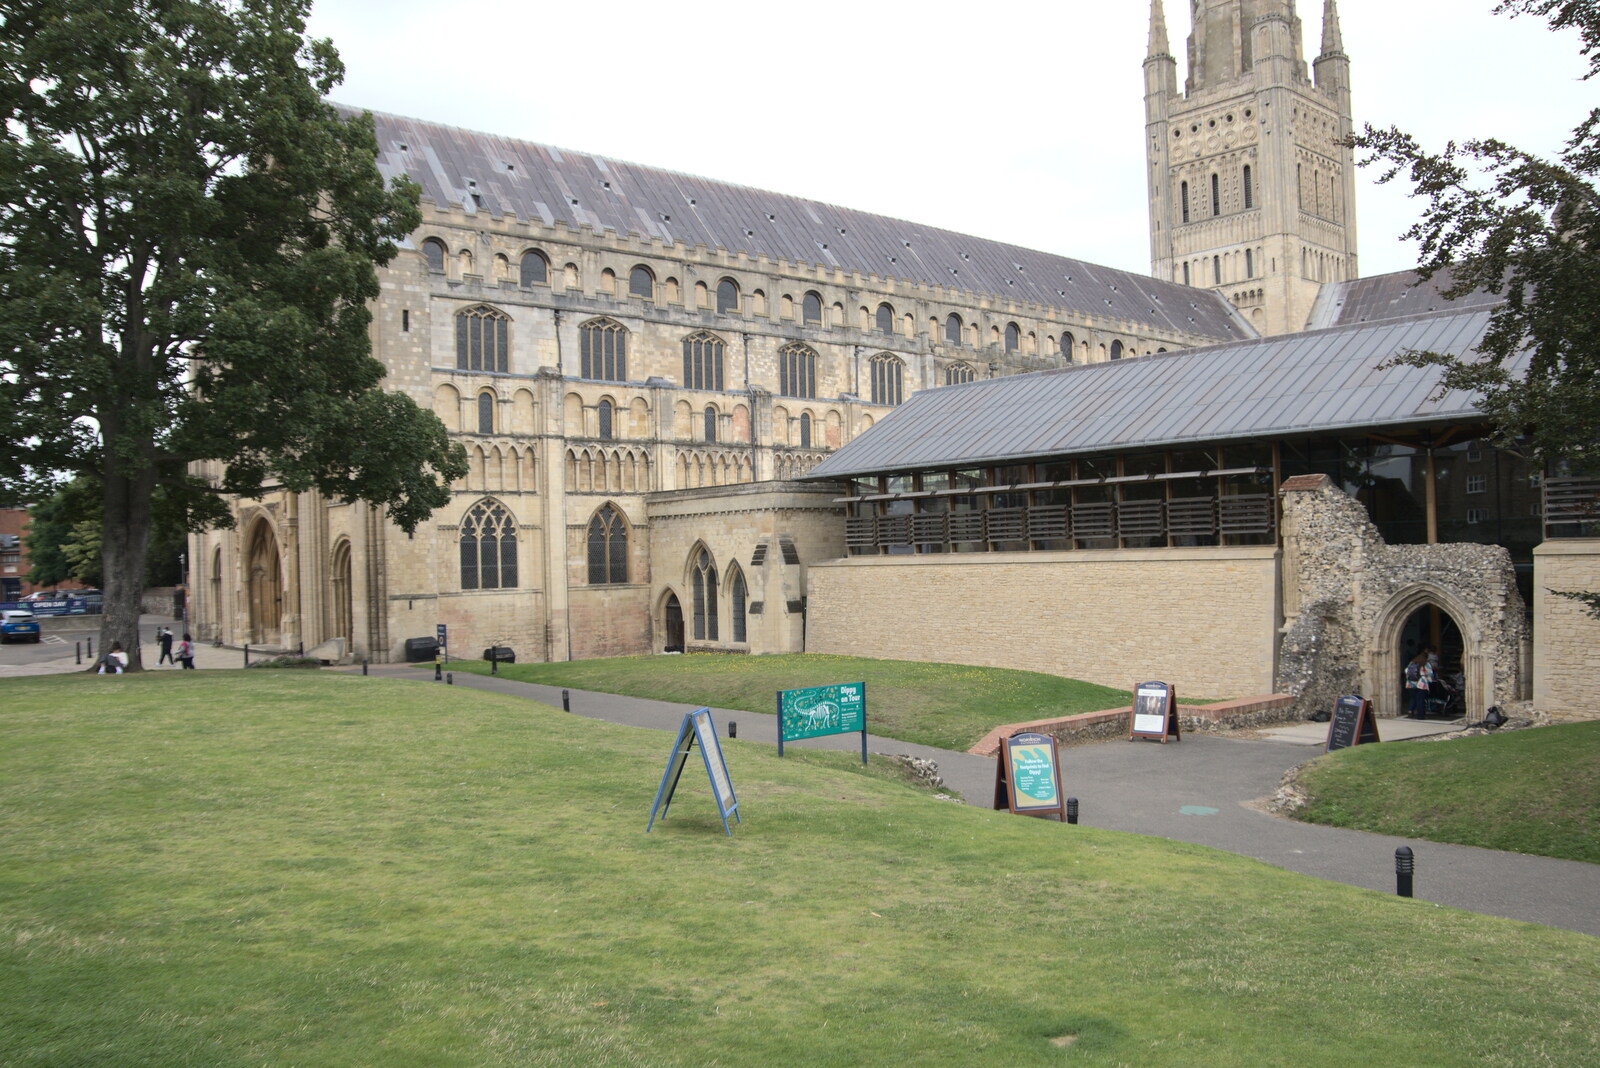 The cathedral's newish café area from Dippy and the City Dinosaur Trail, Norwich, Norfolk - 19th August 2021